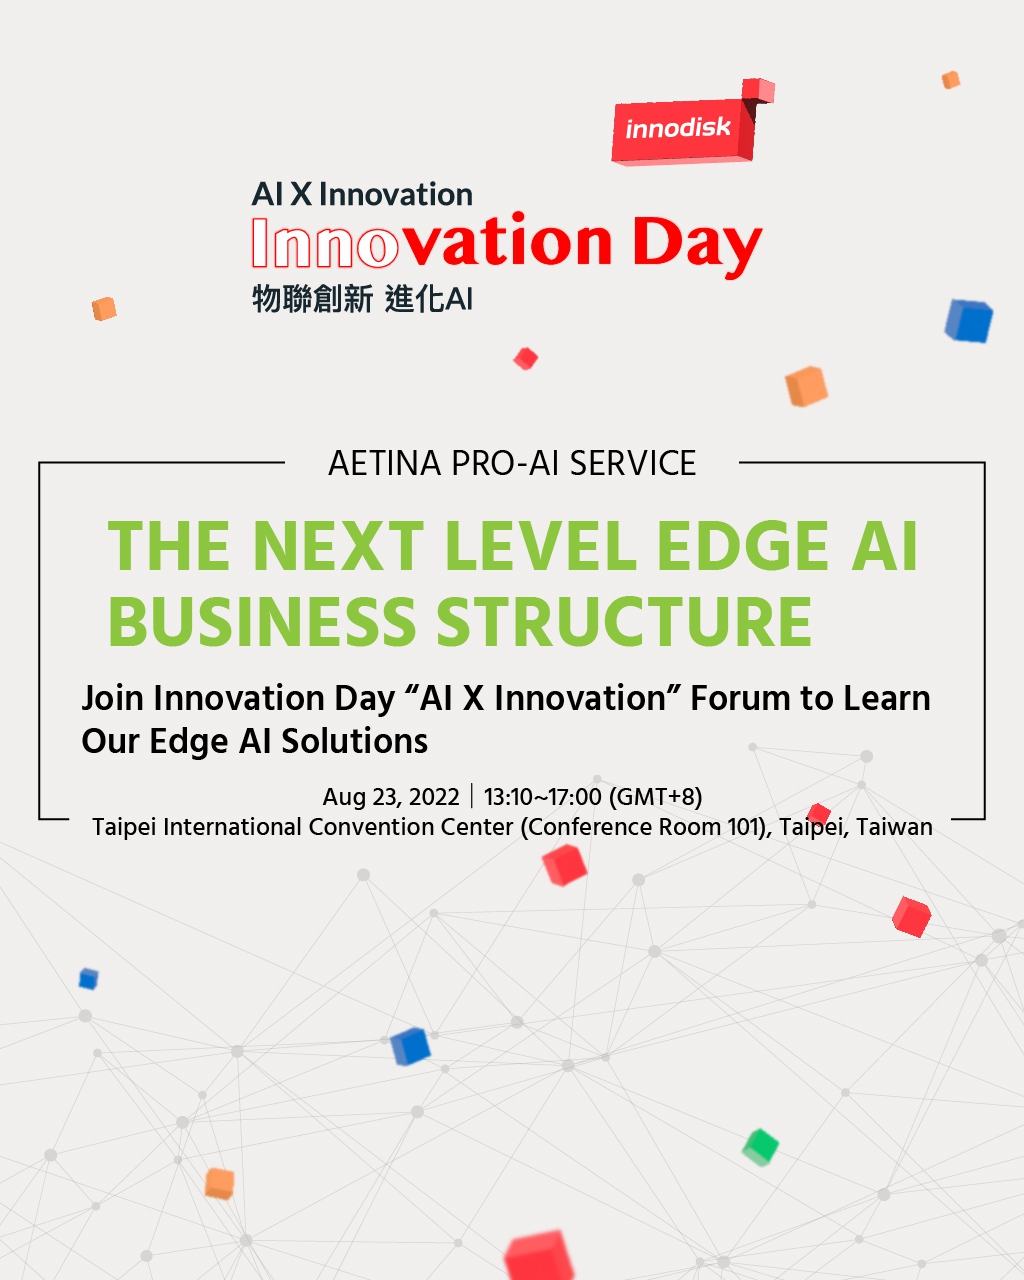 Join Innovation Day “AI X Innovation” Forum to Learn Our Edge AI Solutions